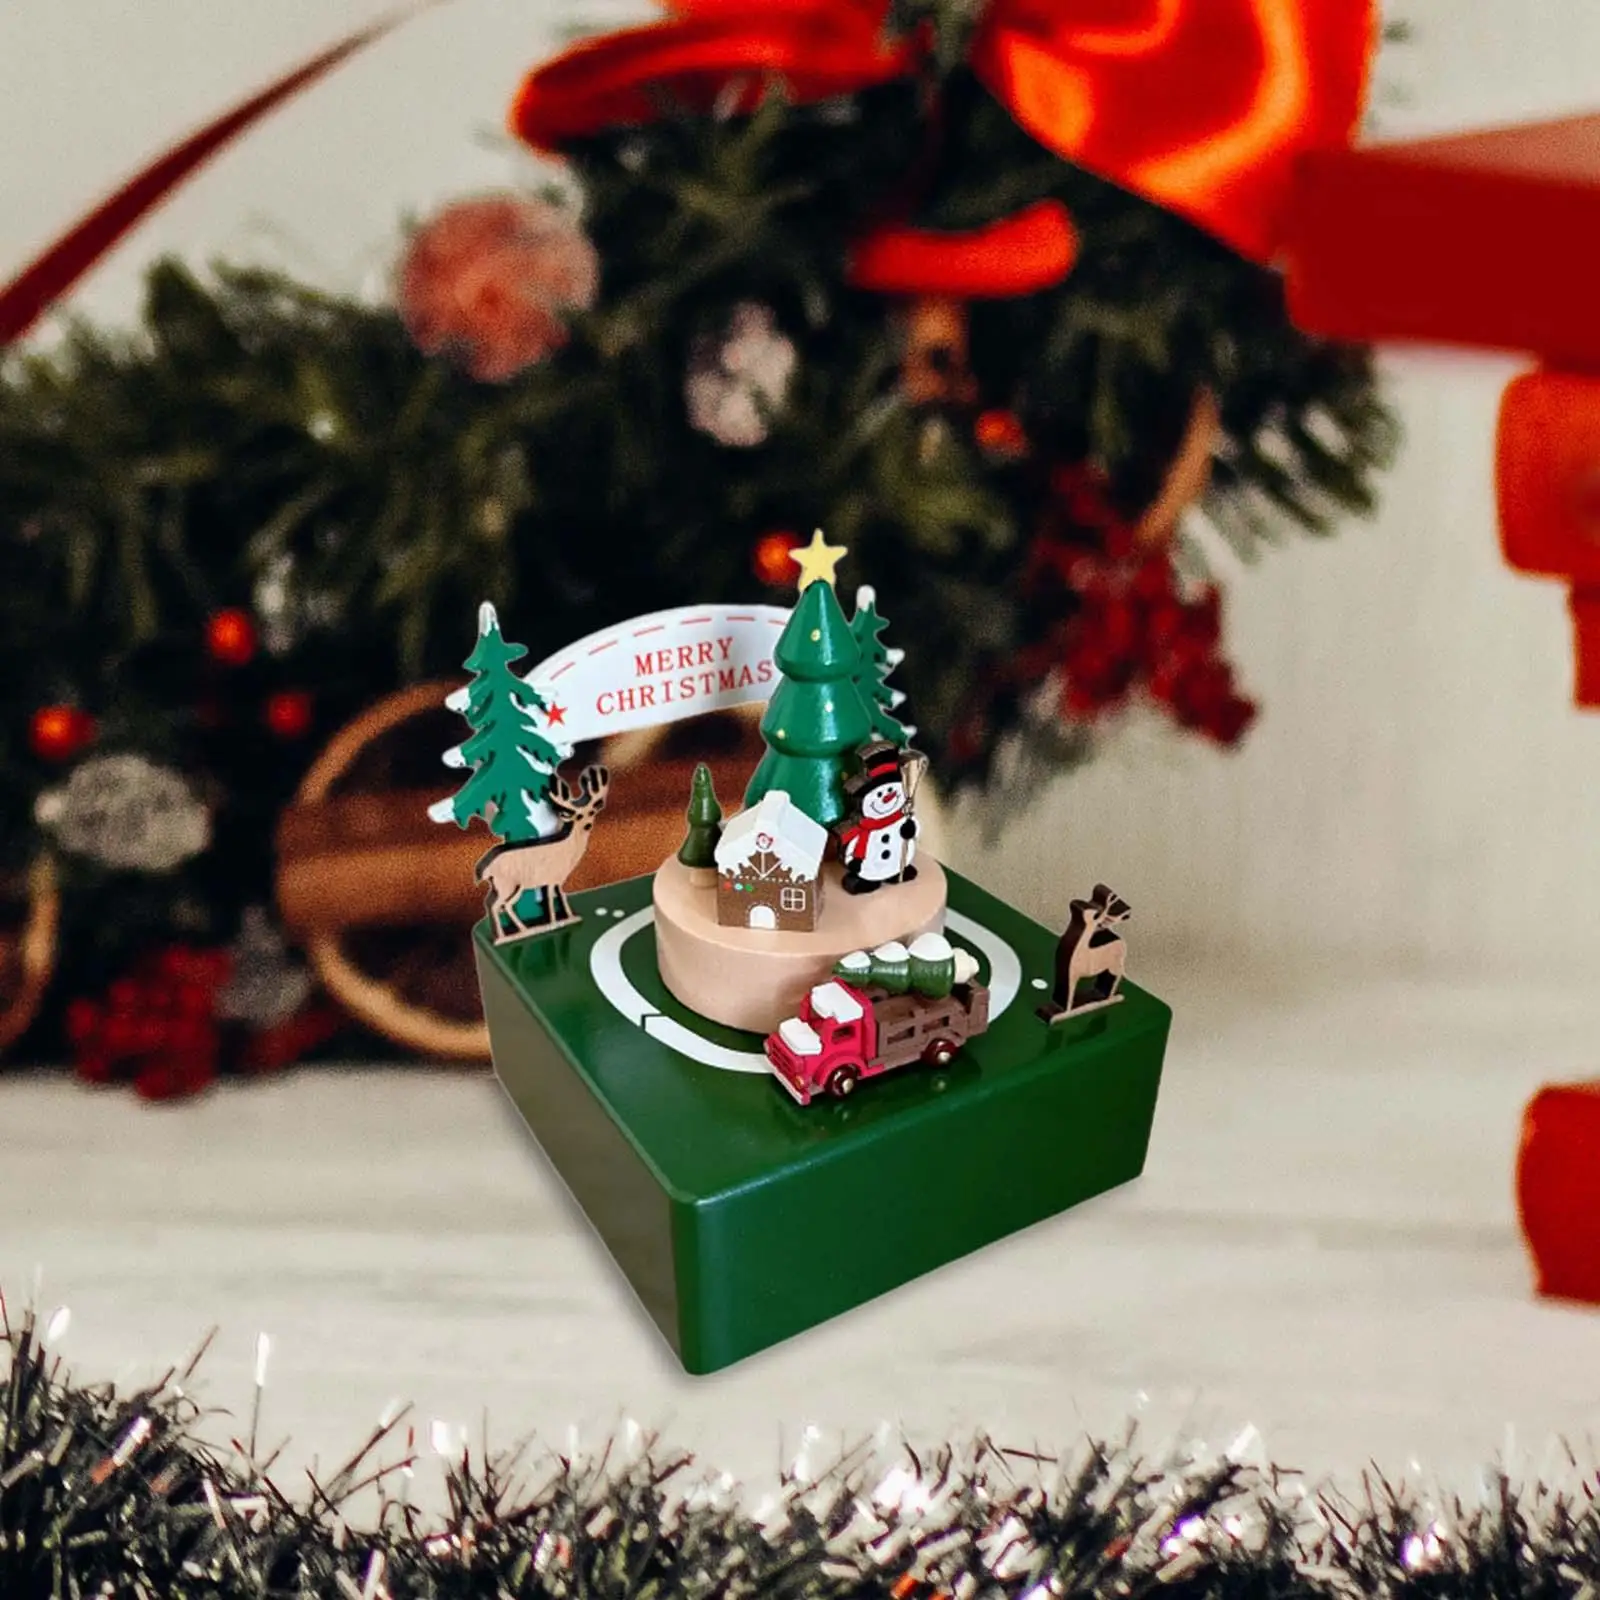 Christmas Music Box Christmas Figurine Crafts Table Centerpiece Tabletop Ornament for Office Festivals Desk Fireplace Home